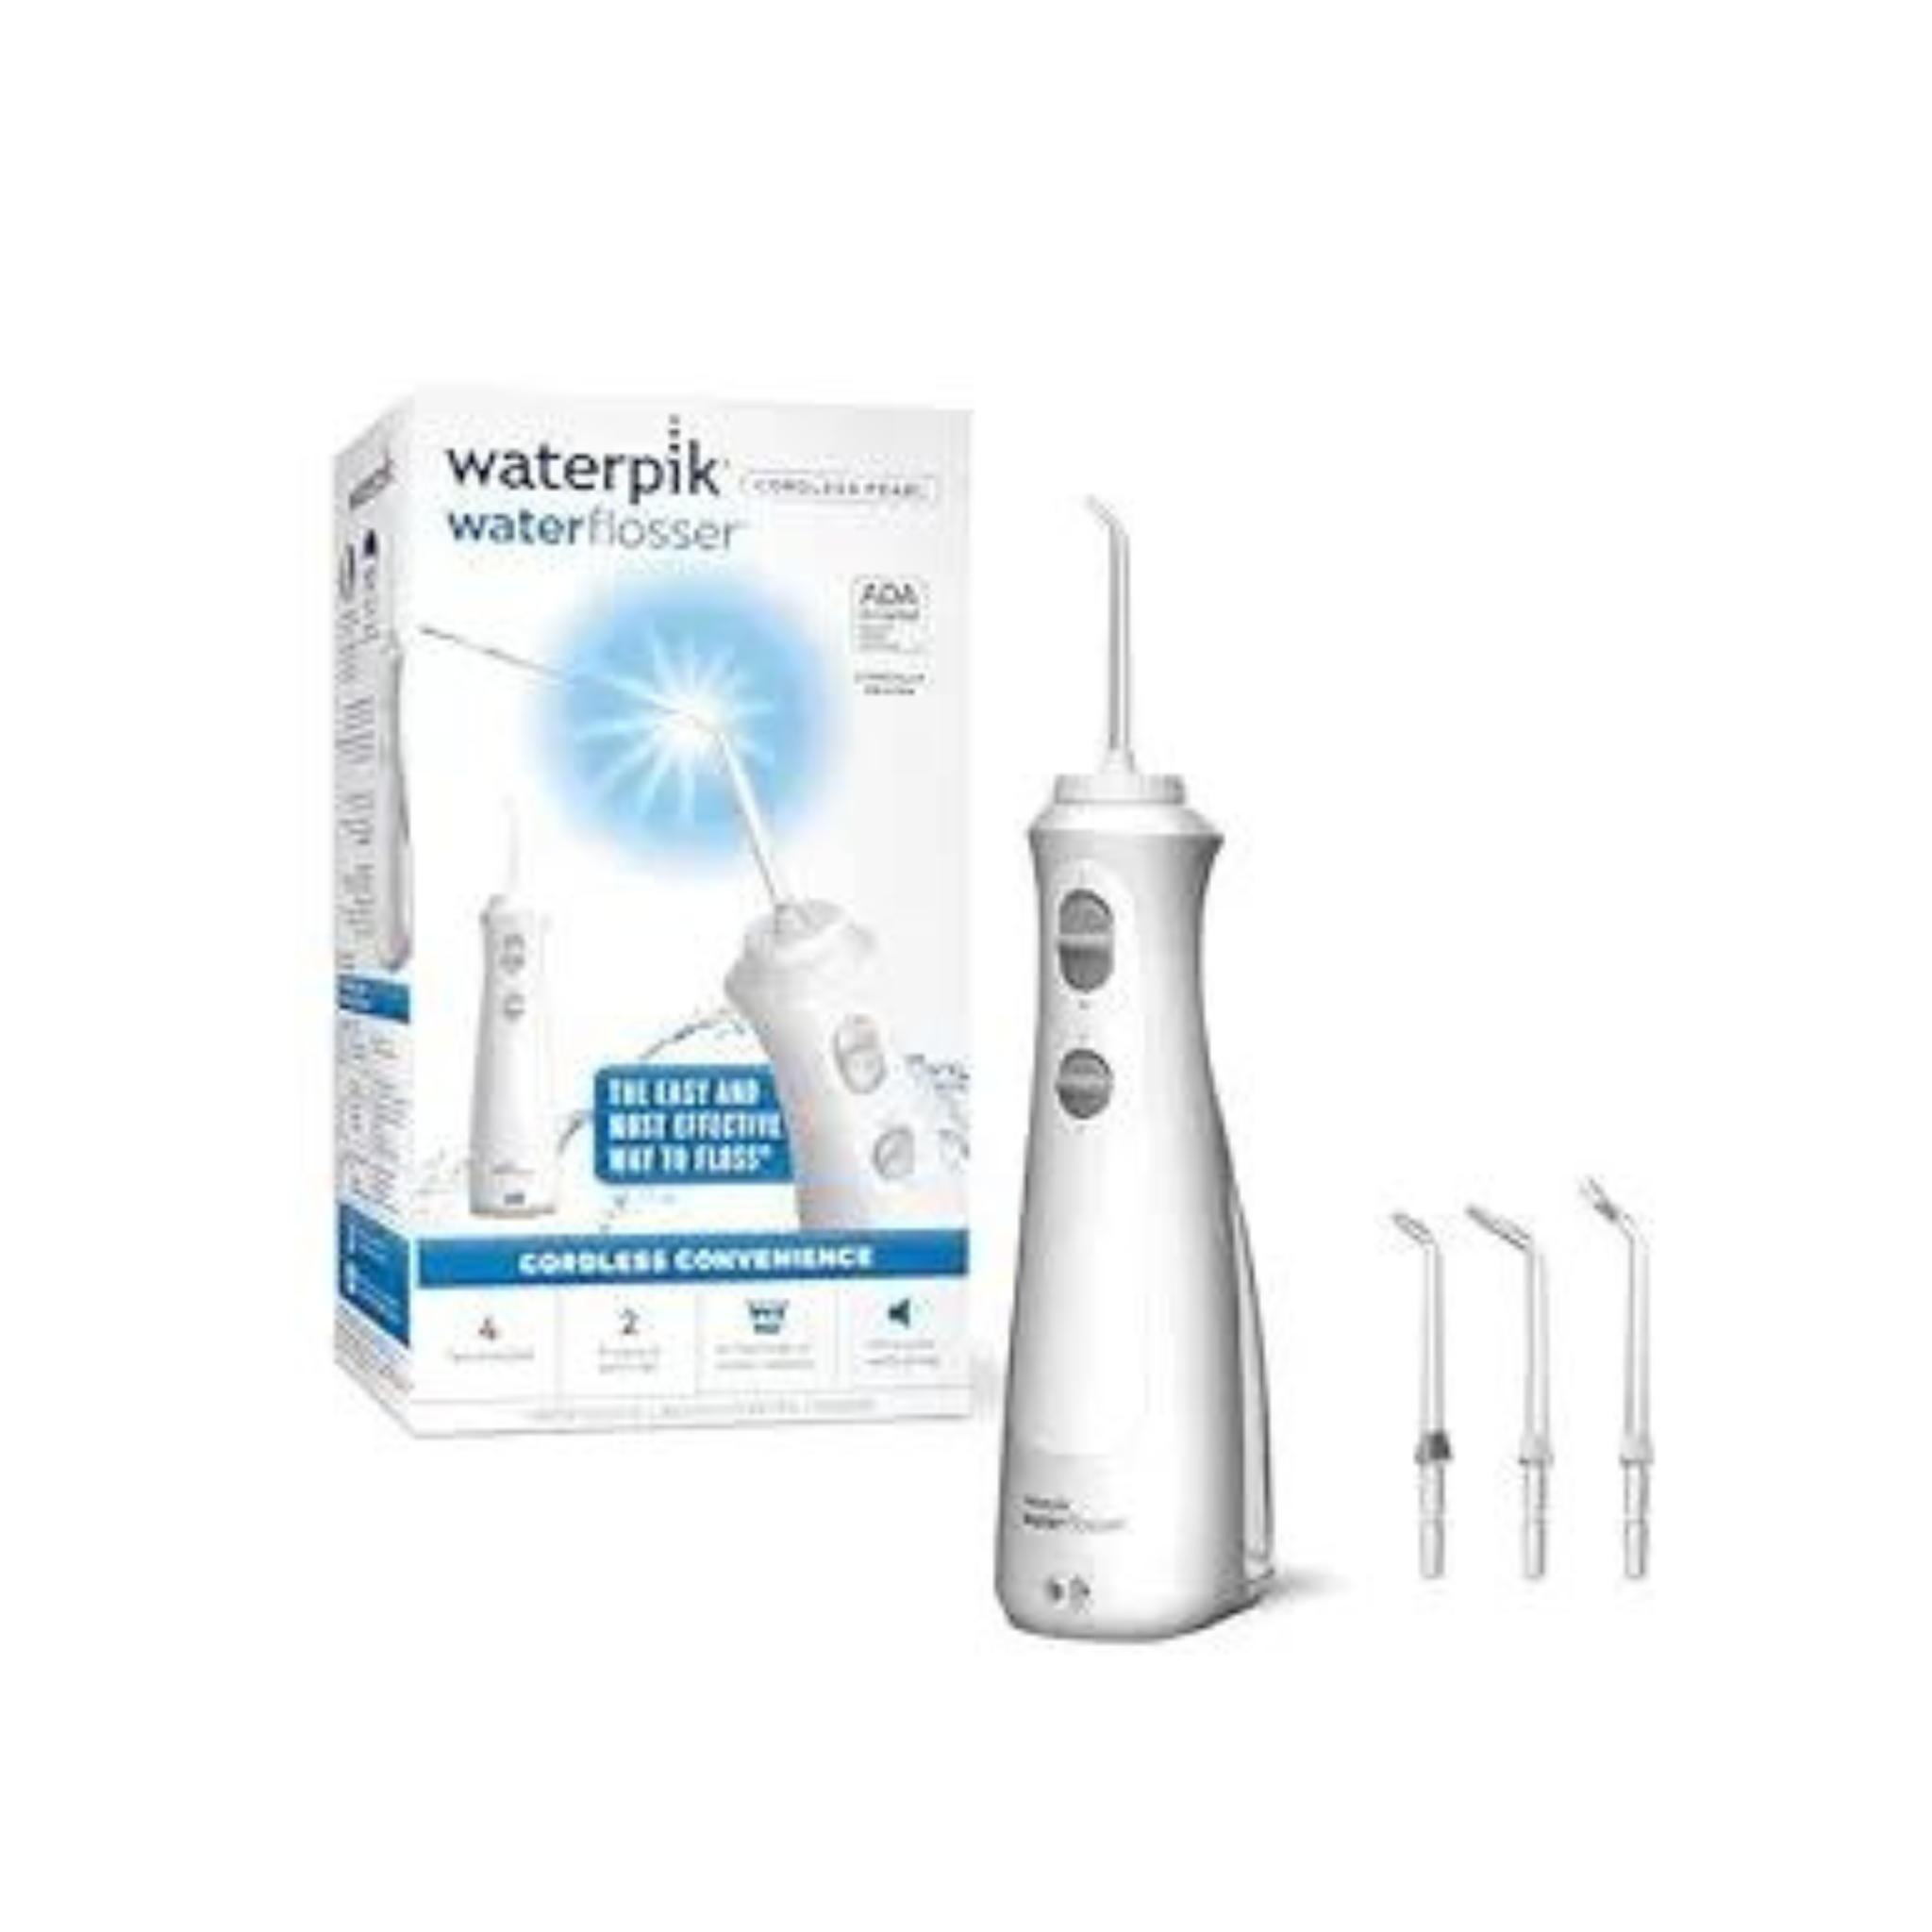 Waterpik Cordless Rechargeable Portable Water Flosser for Teeth, Gums, Braces Care with 4 Flossing Tips